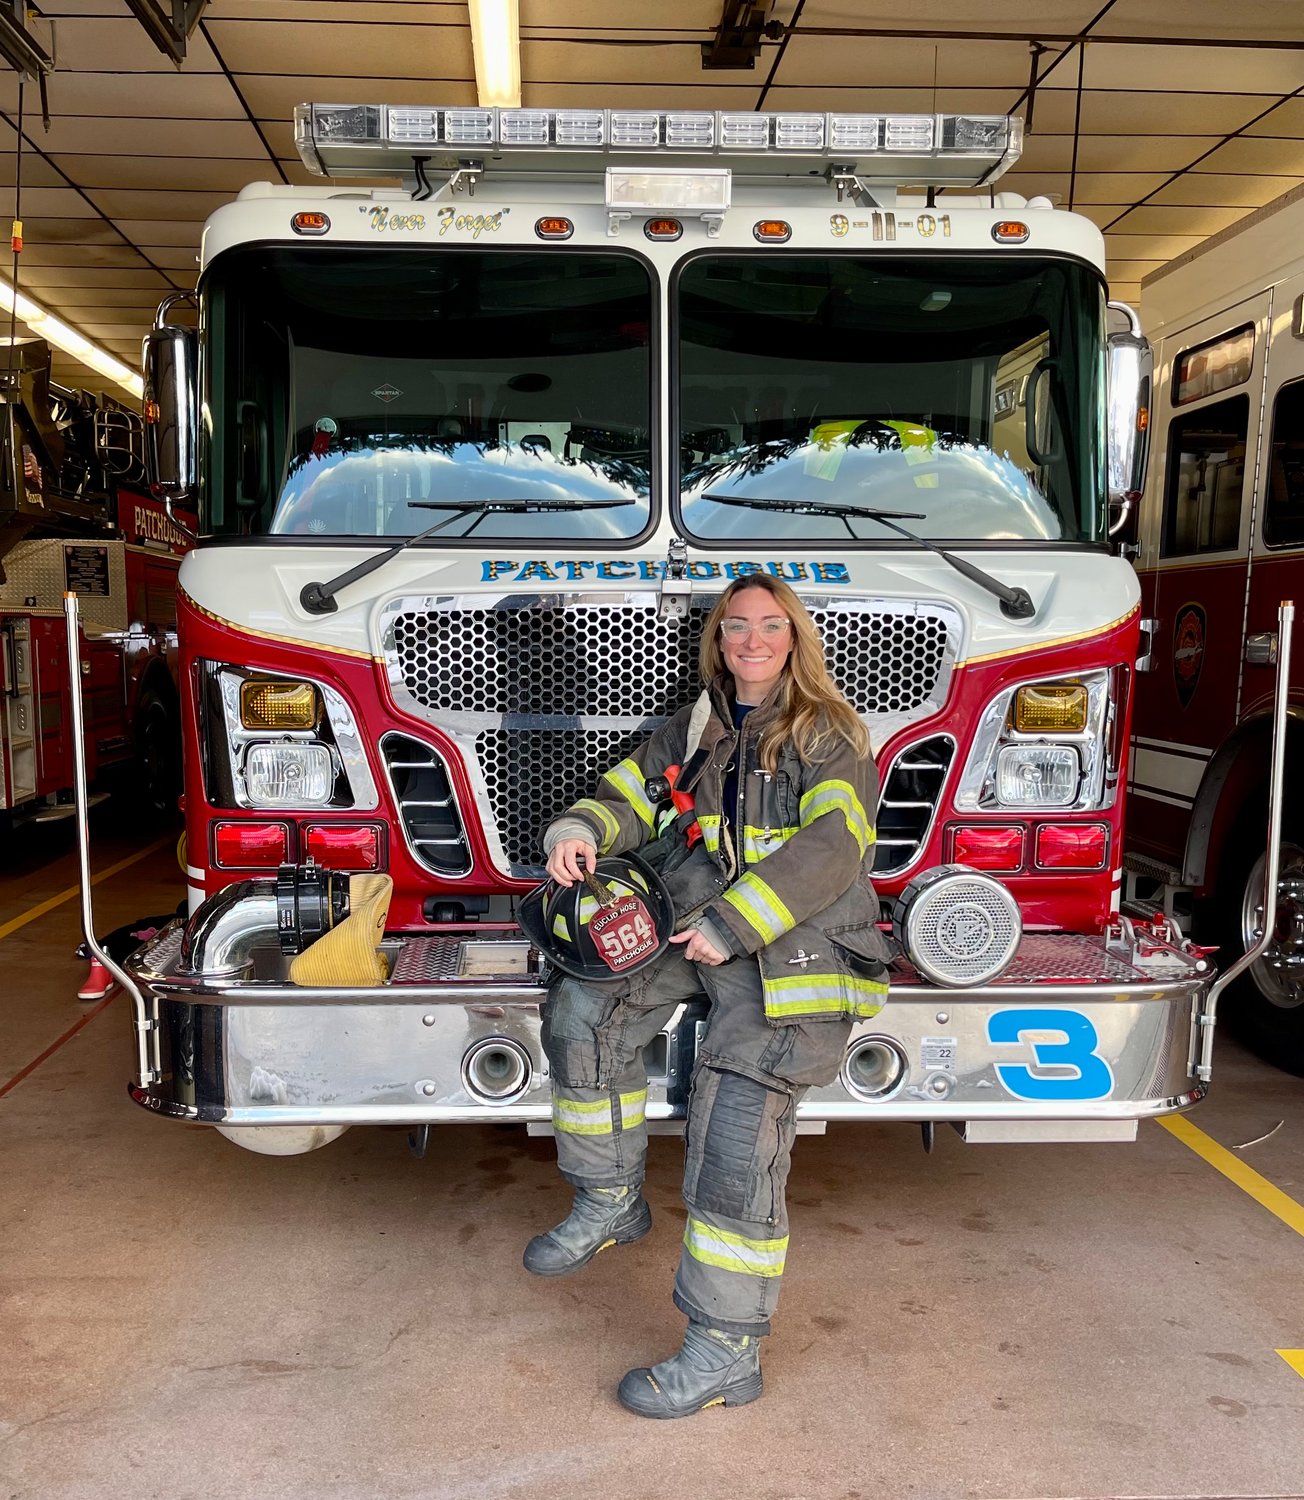 For the first time in Patchogue Fire Department’s over 100 years, Class A firefighter Morgan Poulos Keating made history as the department’s first woman officer.